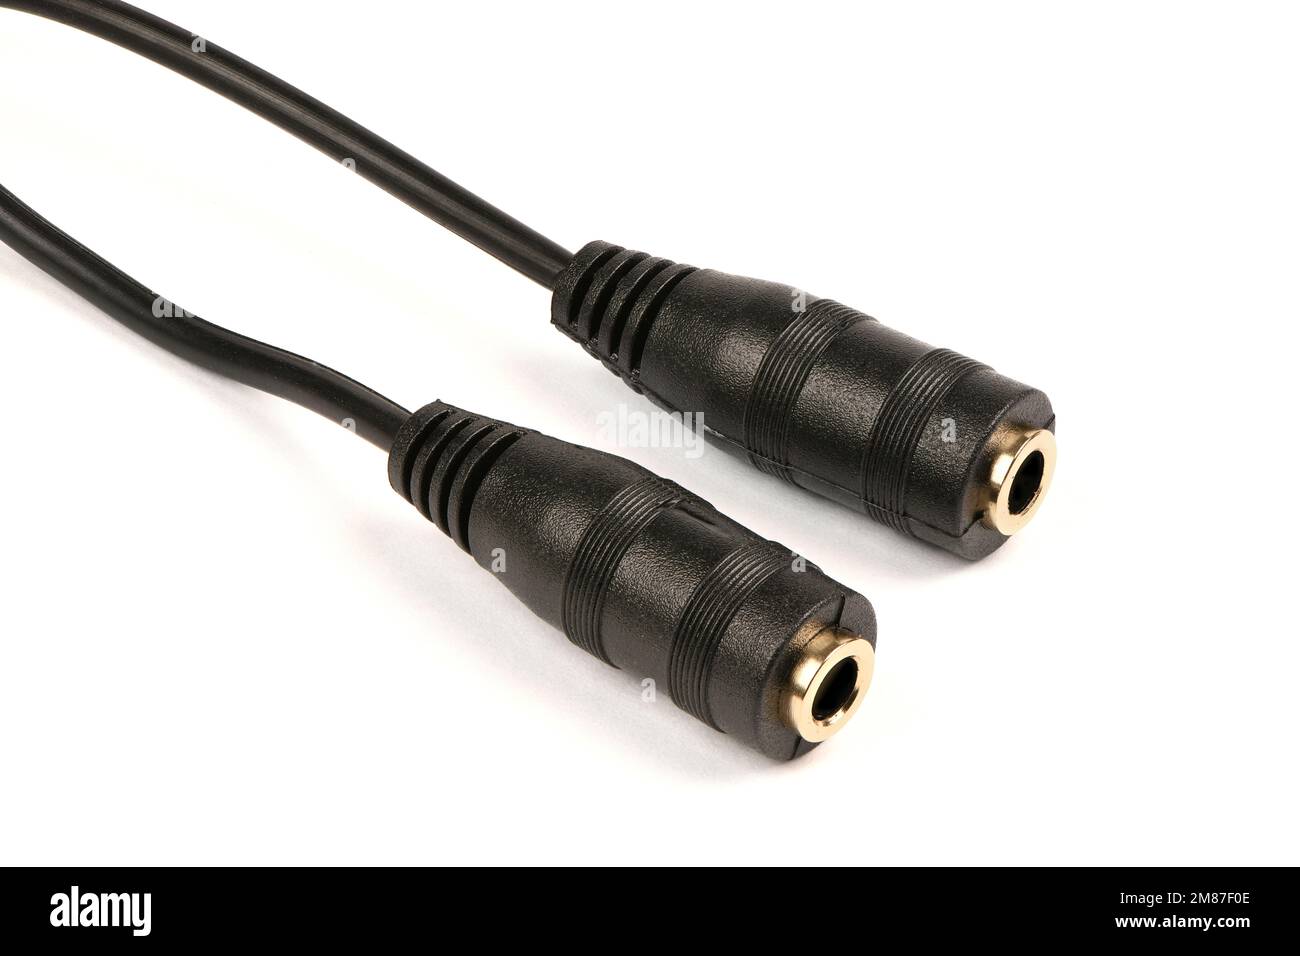 Audio cable splitter, stereo male to two female stereo audio jack 3,5 mm, isolated on a white background. Extreme closeup. High resolution photo. Full Stock Photo